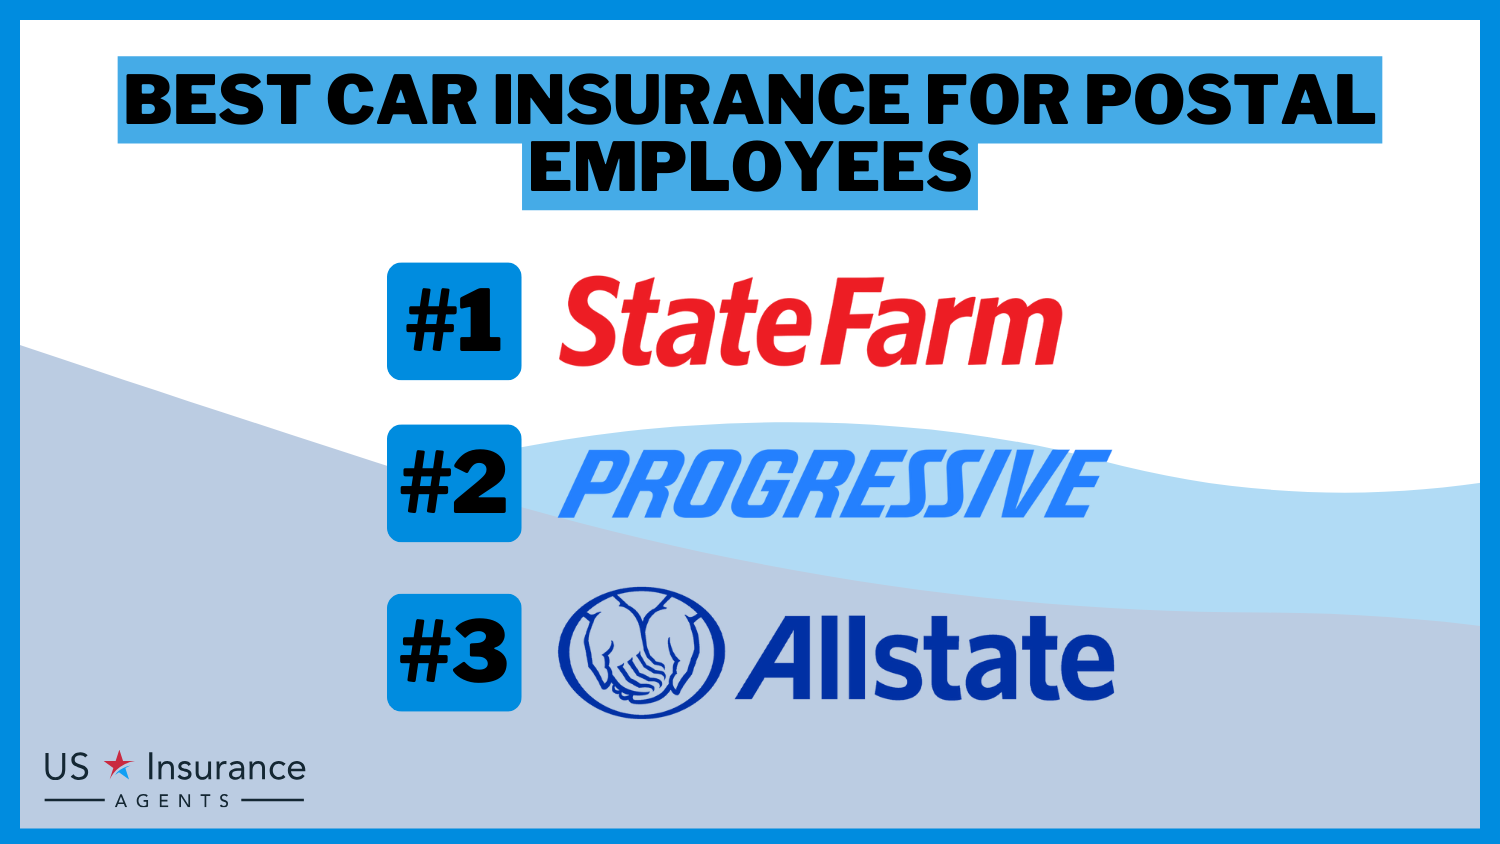 Best Car Insurance for Postal Employees: State Farm, Progressive, and Allstate.